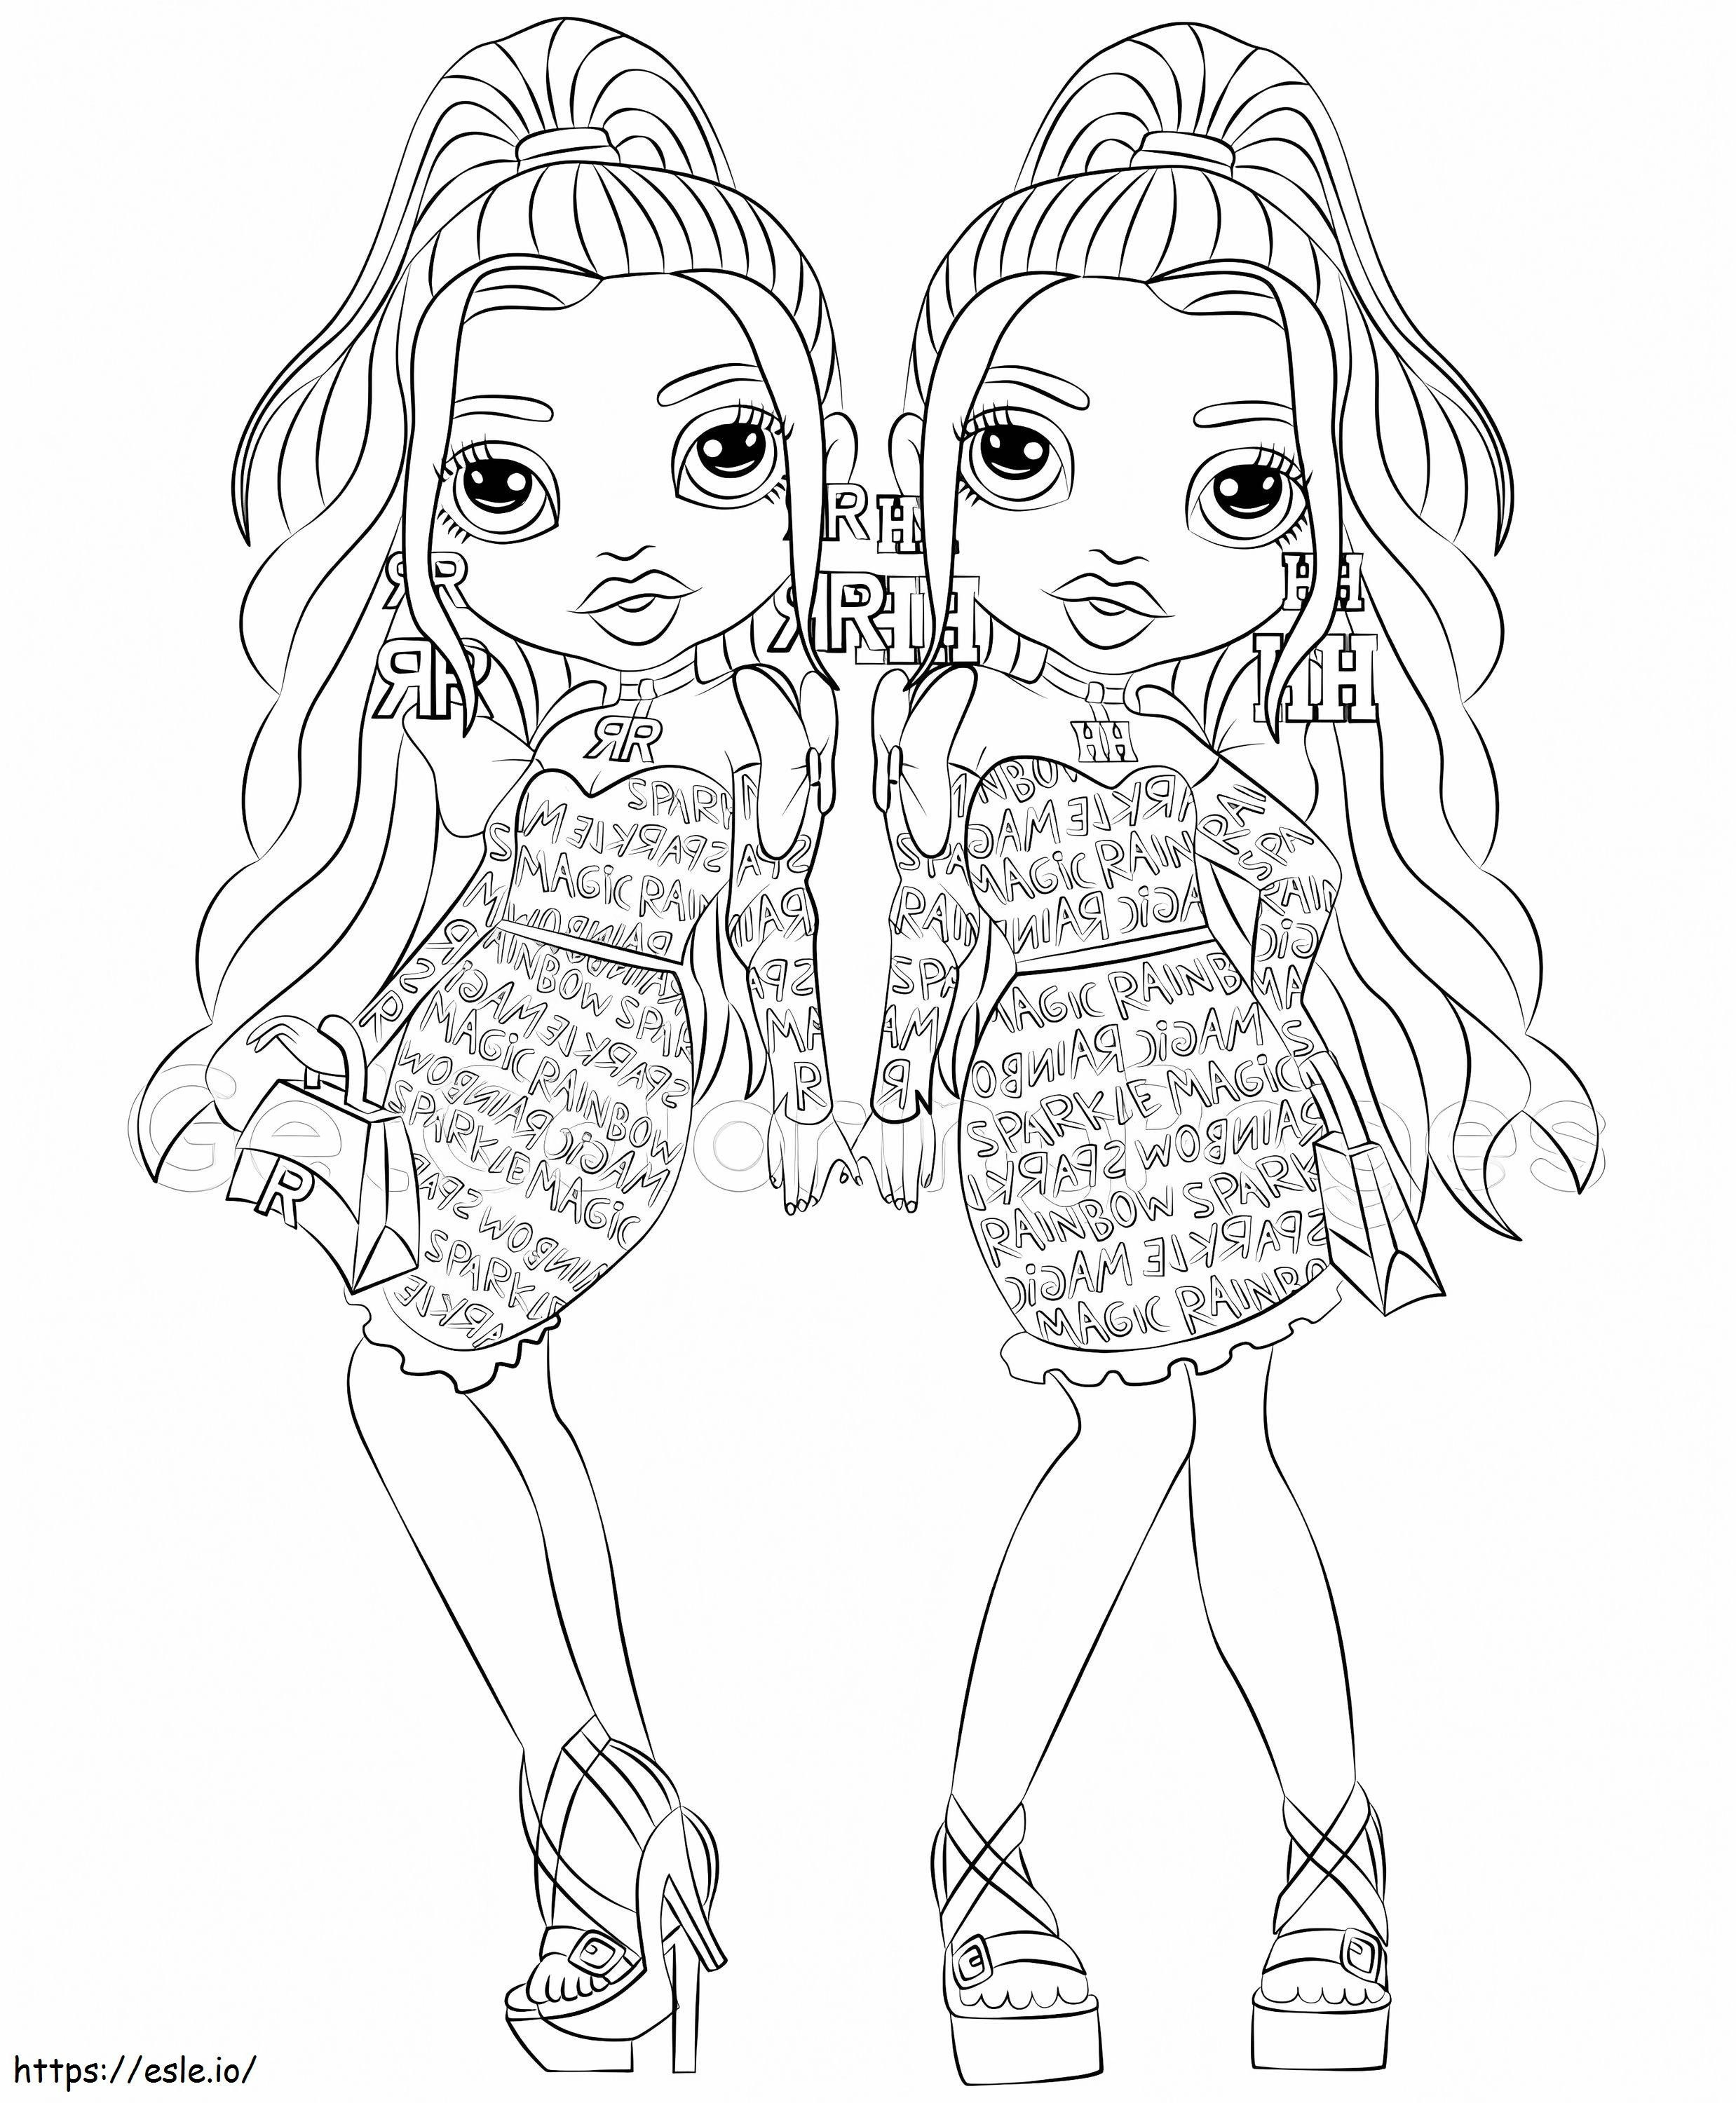 Twins Girls Rainbow High coloring page